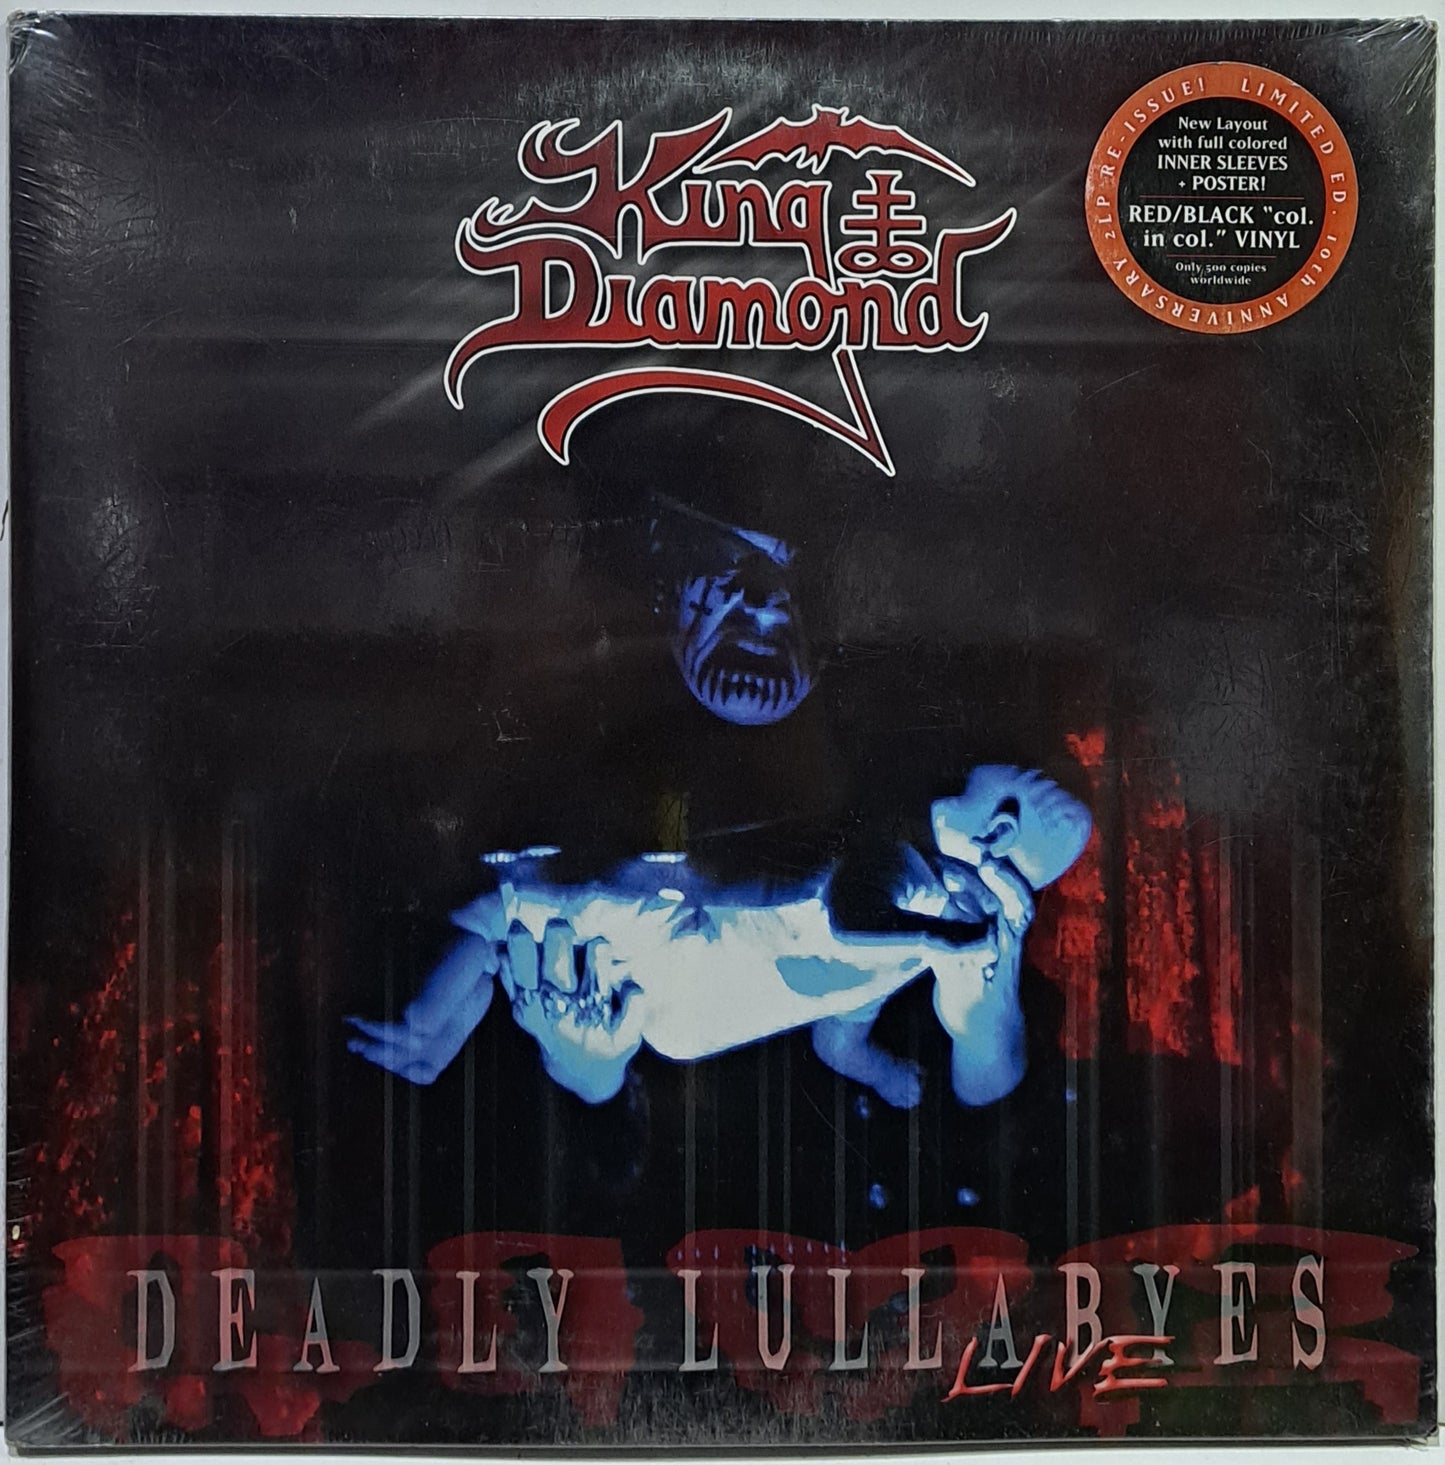 KING DIAMOND - DEADLY LULLABYES 2 LPS